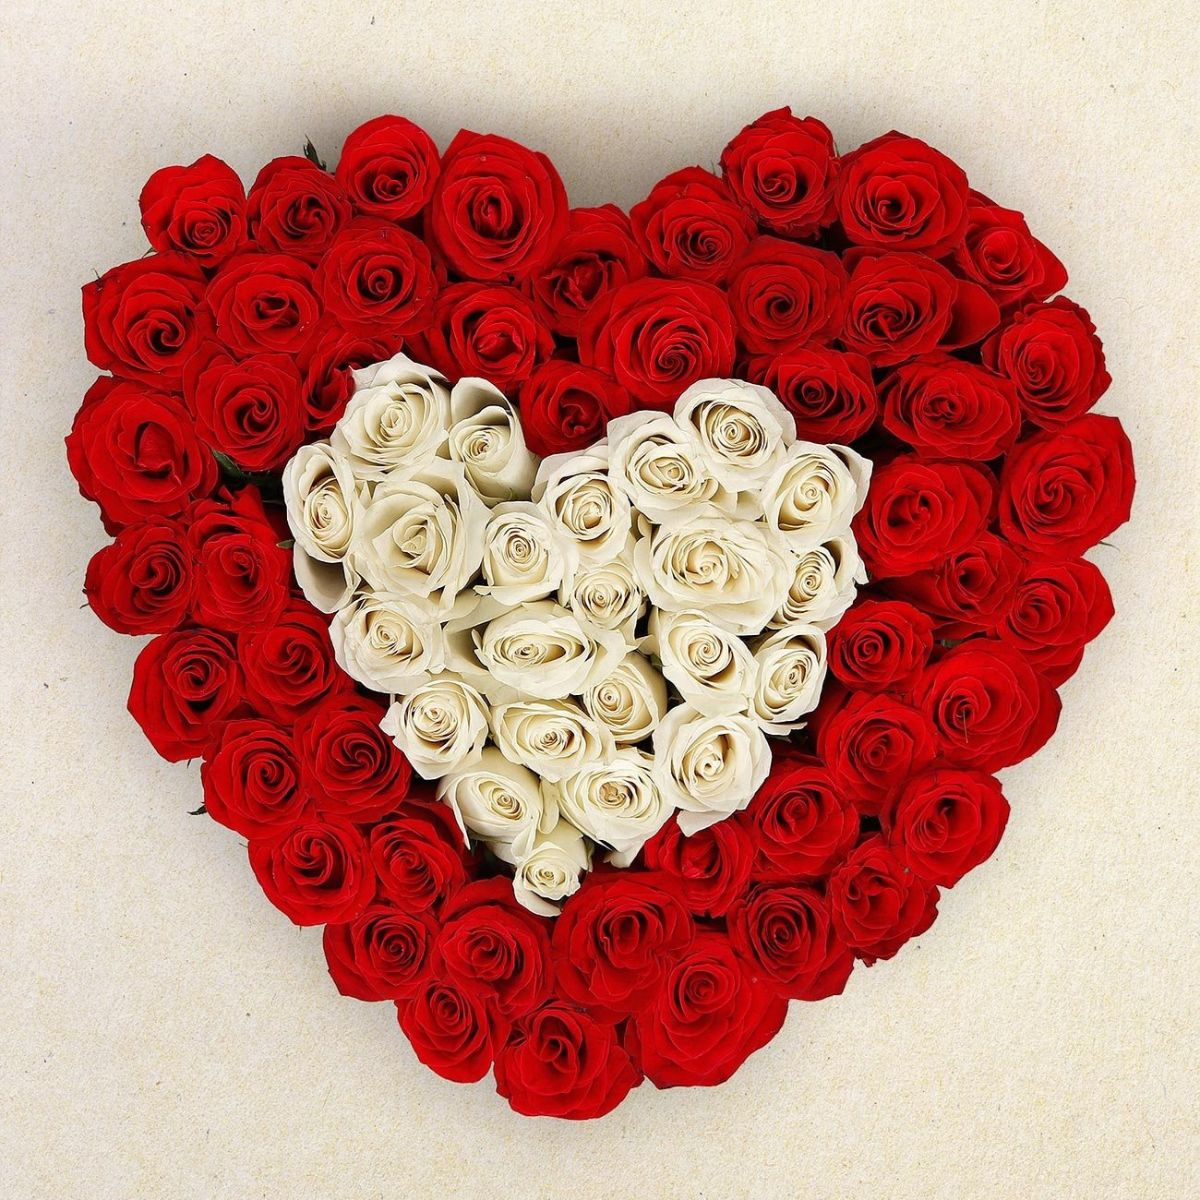 Red heart shaped bouquet featured